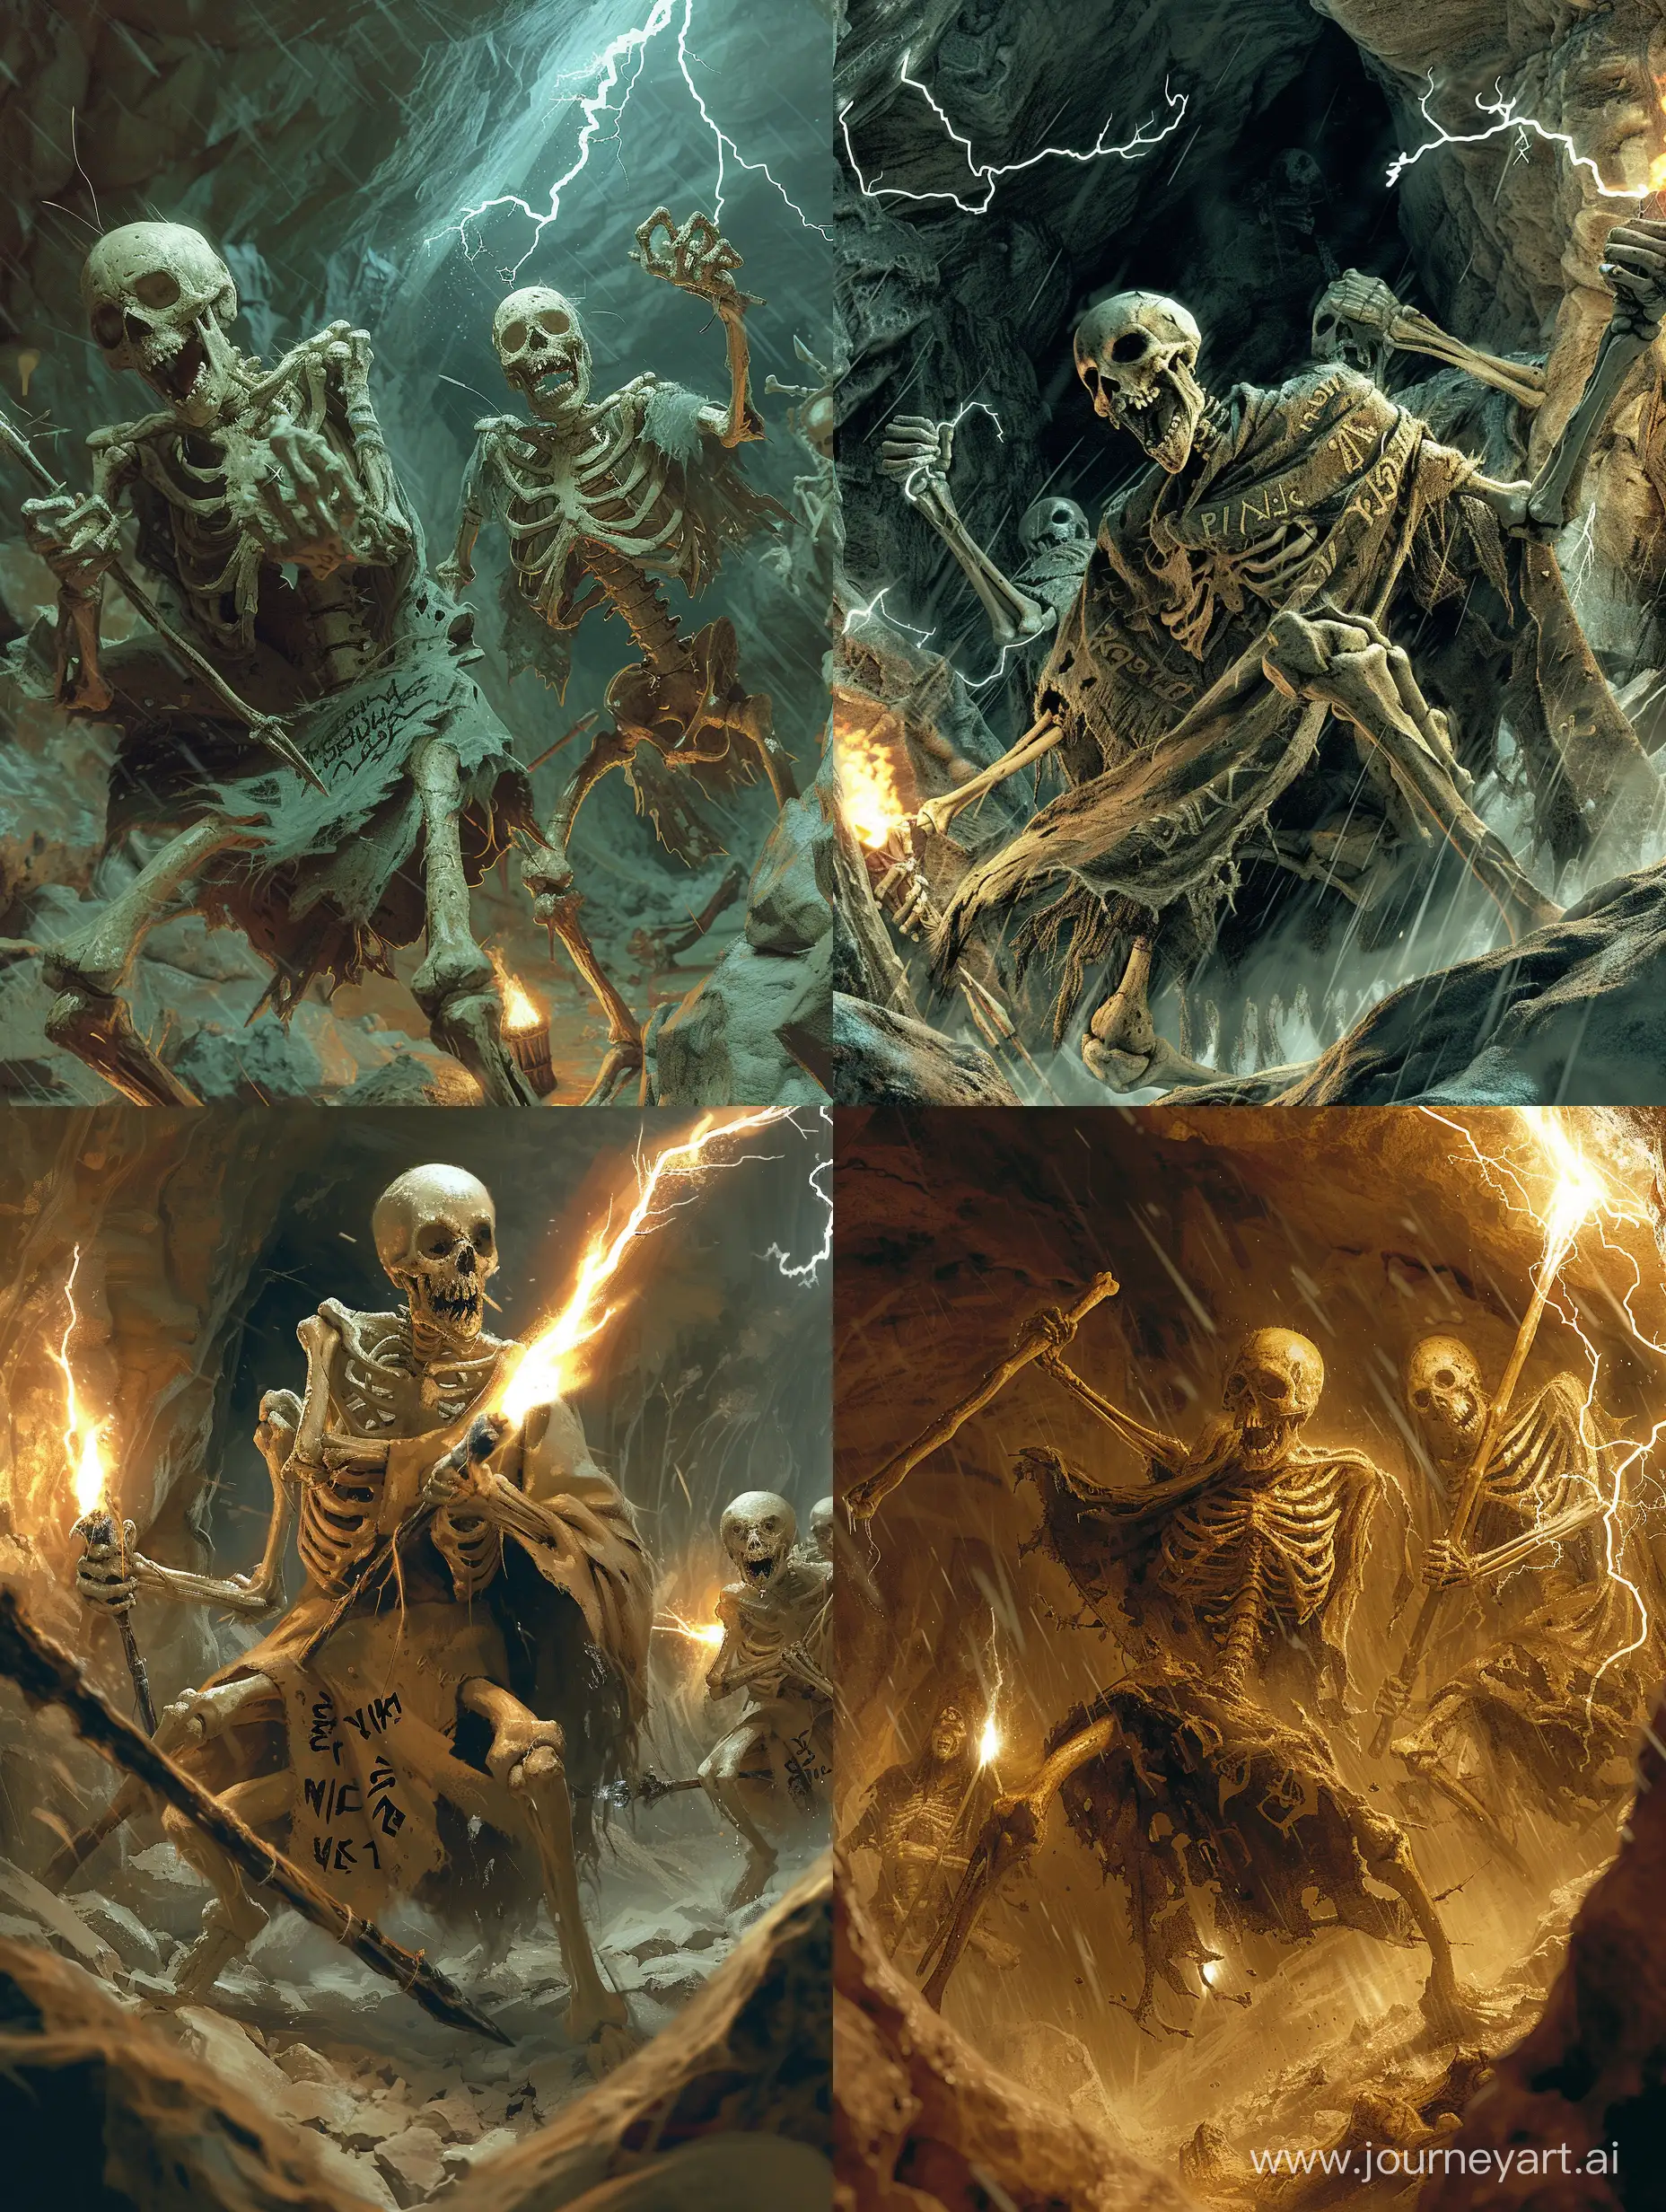 Living skeletons with torn robe,in a cave-like place underground,Lightning bone weapons,runic script on bones,attacking,Angry,torches that give light to the environment,intricate,incredible detail,terrifying,Digital Art,Imaginary image,fantasy.